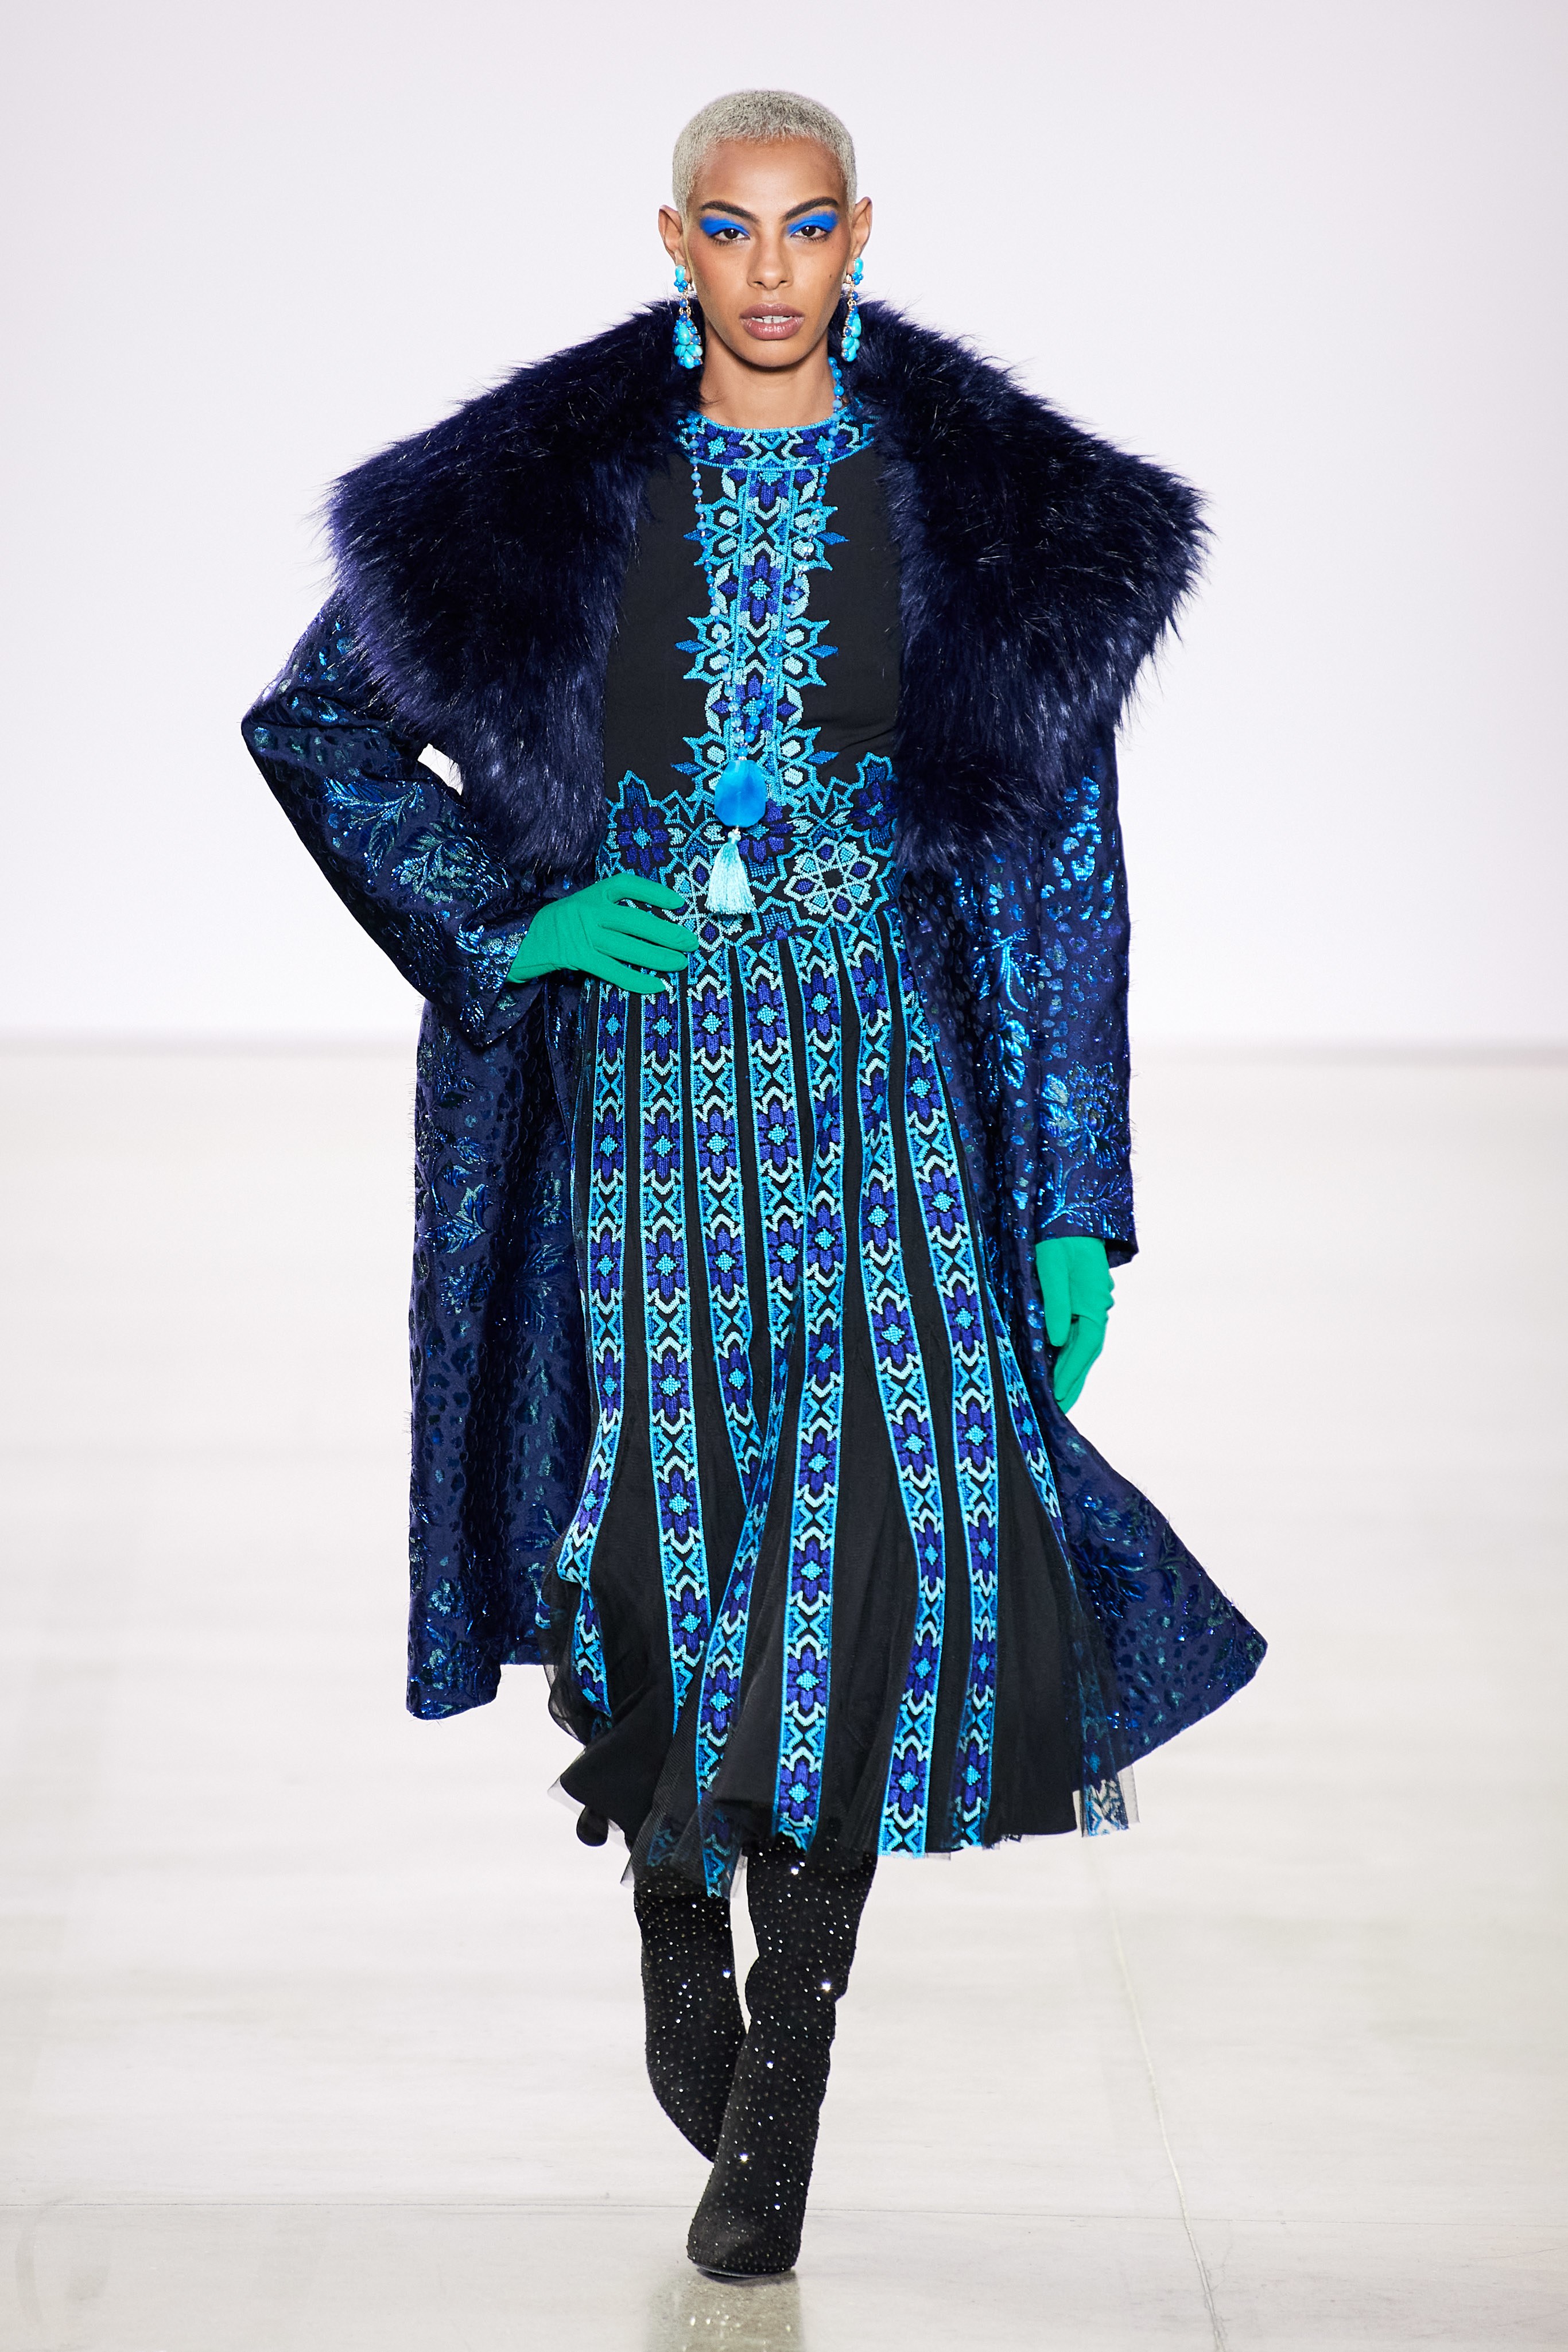 nyfw-2020-photos-aw20-the-most-rave-worthy-designs-from-the-runways